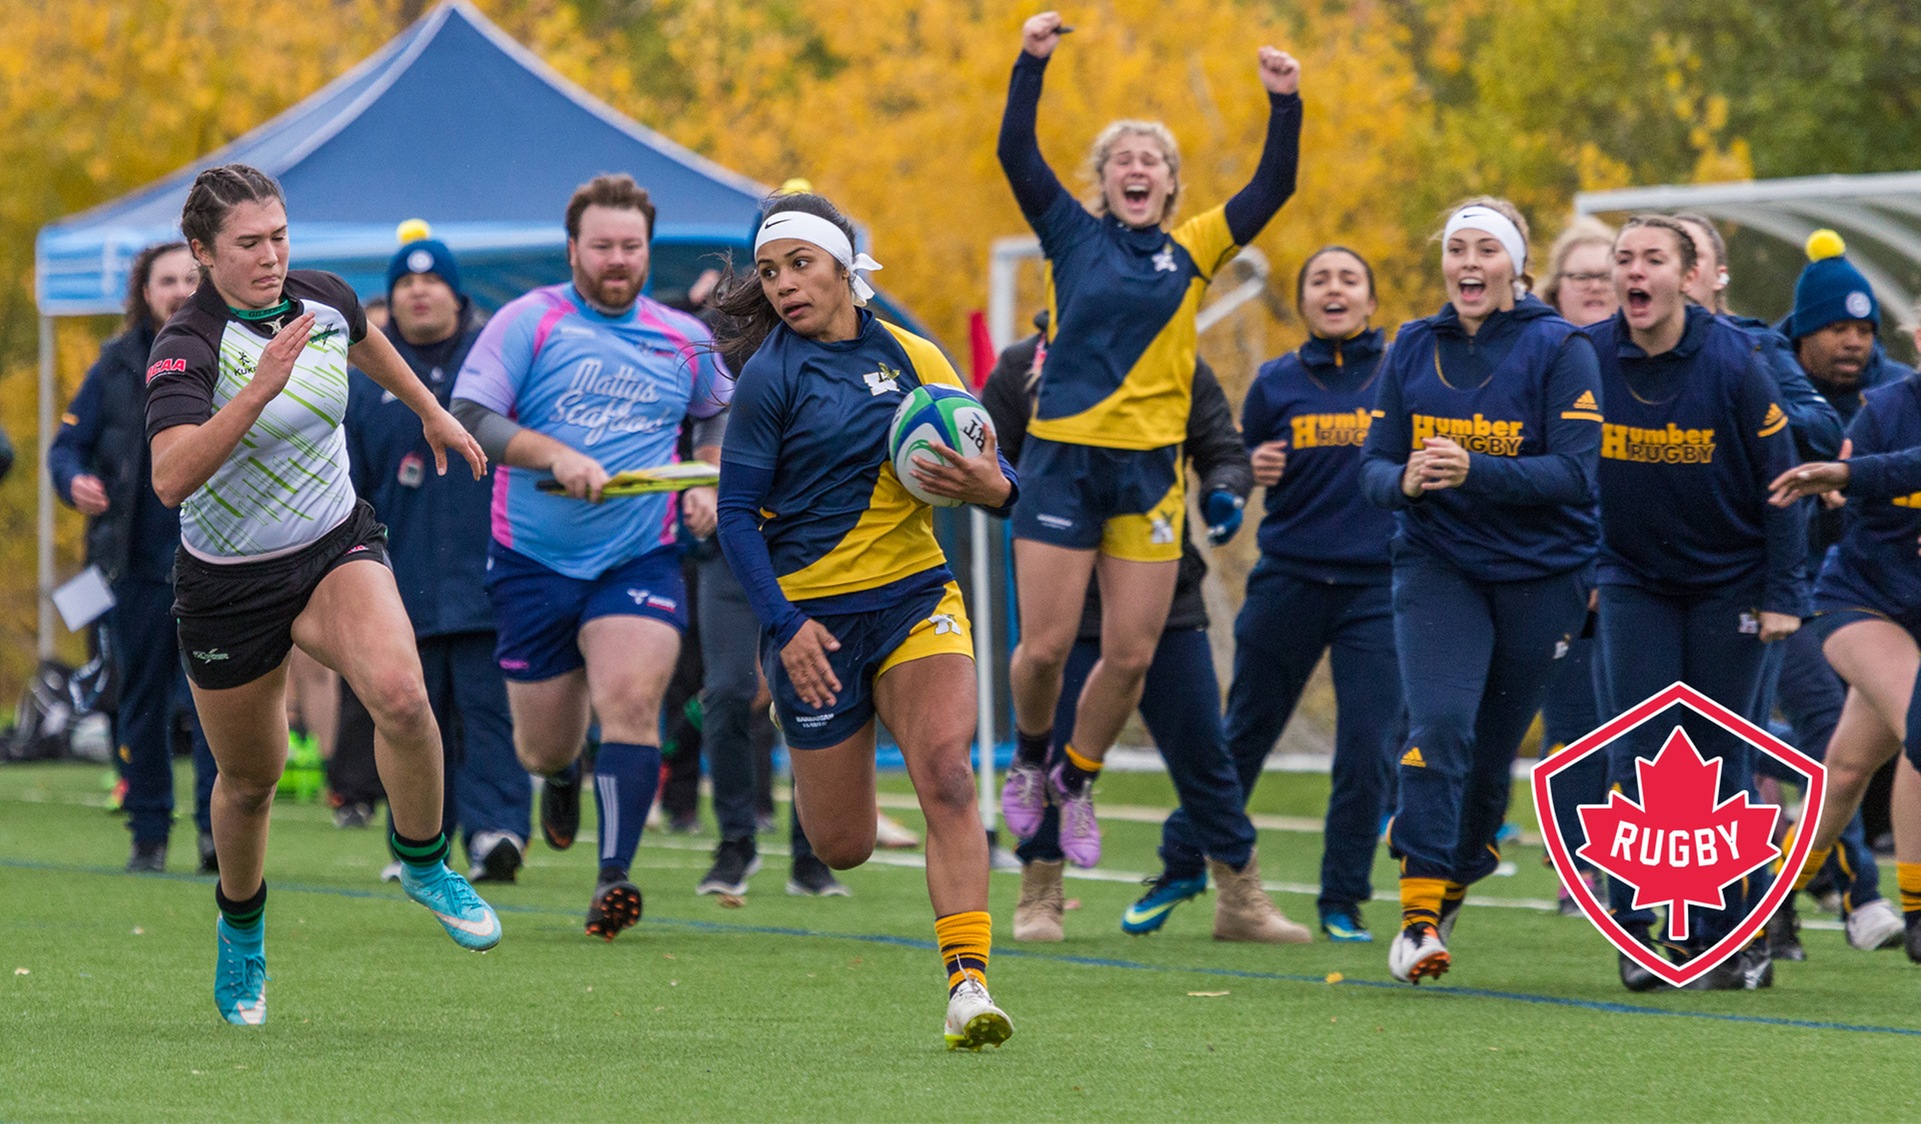 Humber Rugby Star Heading West for Olympic Showcase